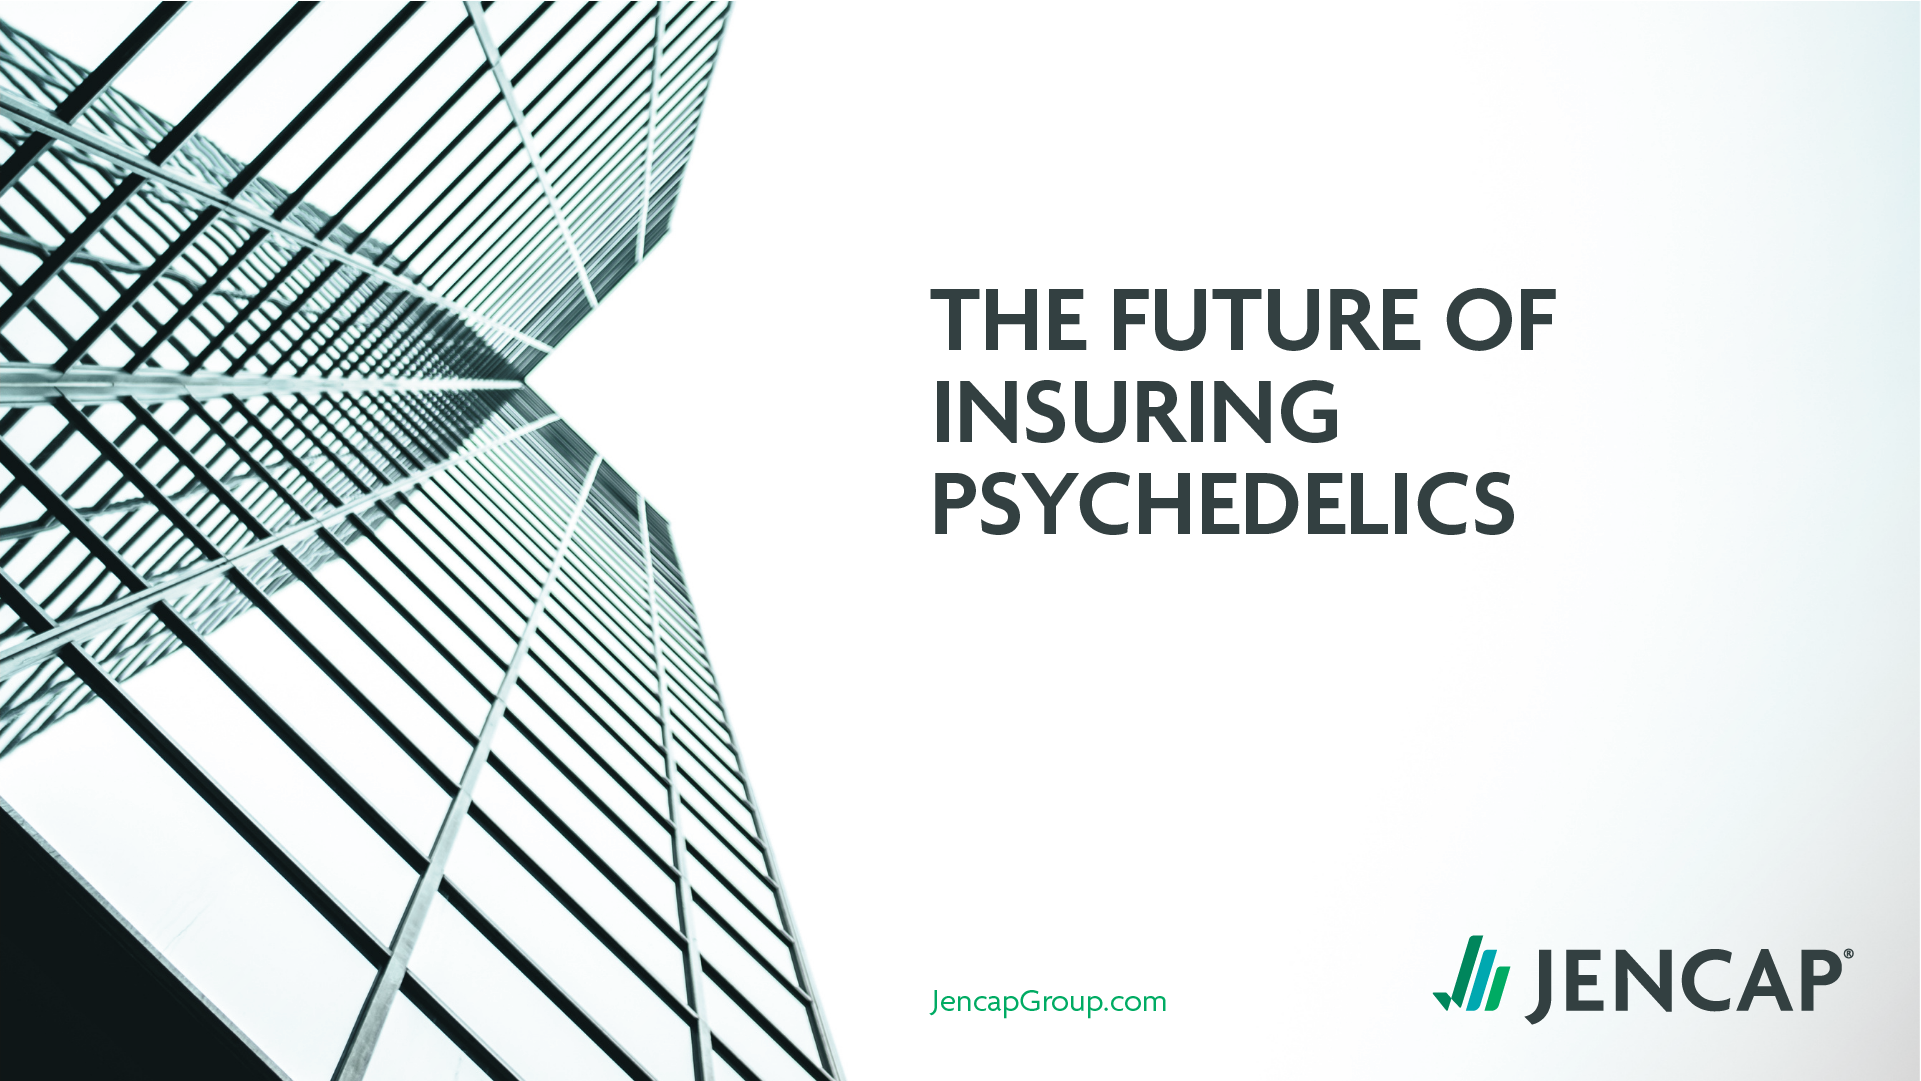 The Future of Insuring Psychedelics